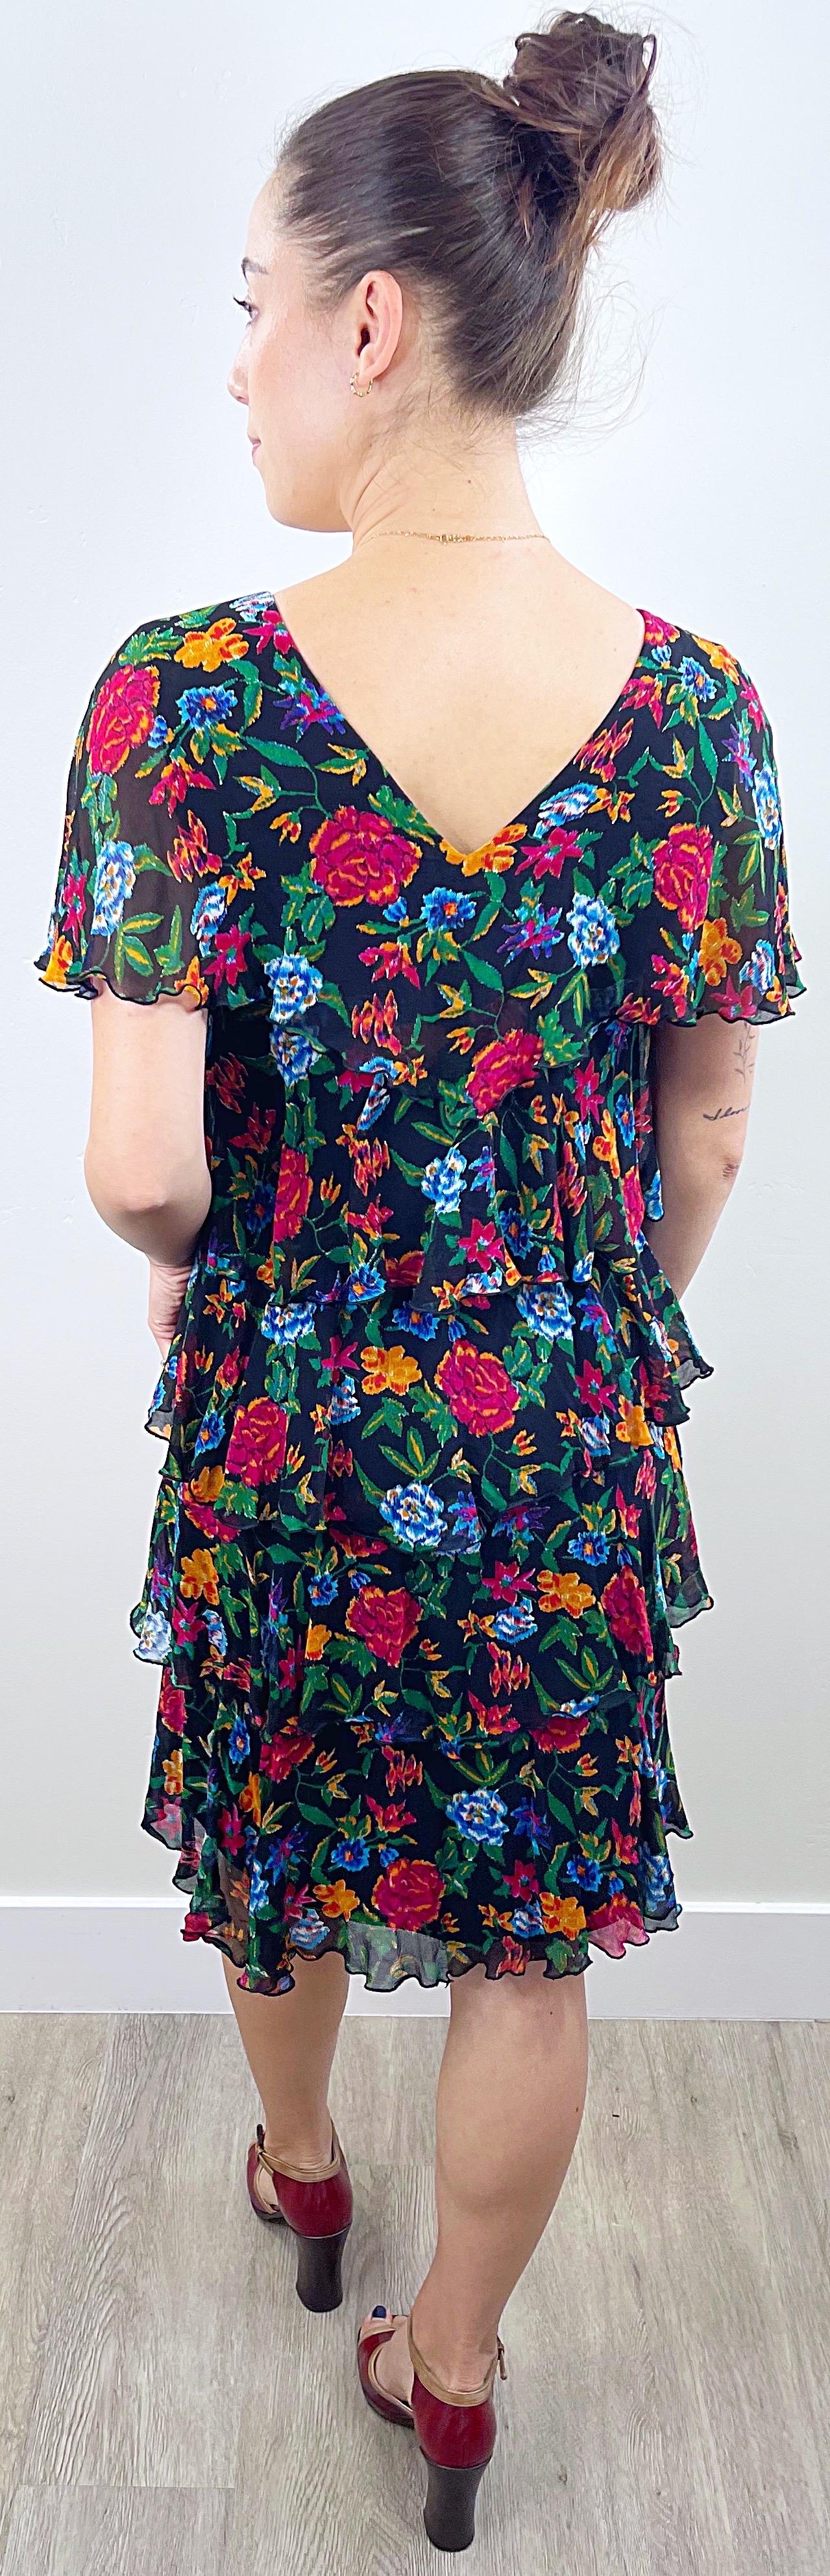 1970s Holly’s Harp Silk Chiffon Colorful Flower Print Tiered Vintage 70s Dress In Excellent Condition For Sale In San Diego, CA